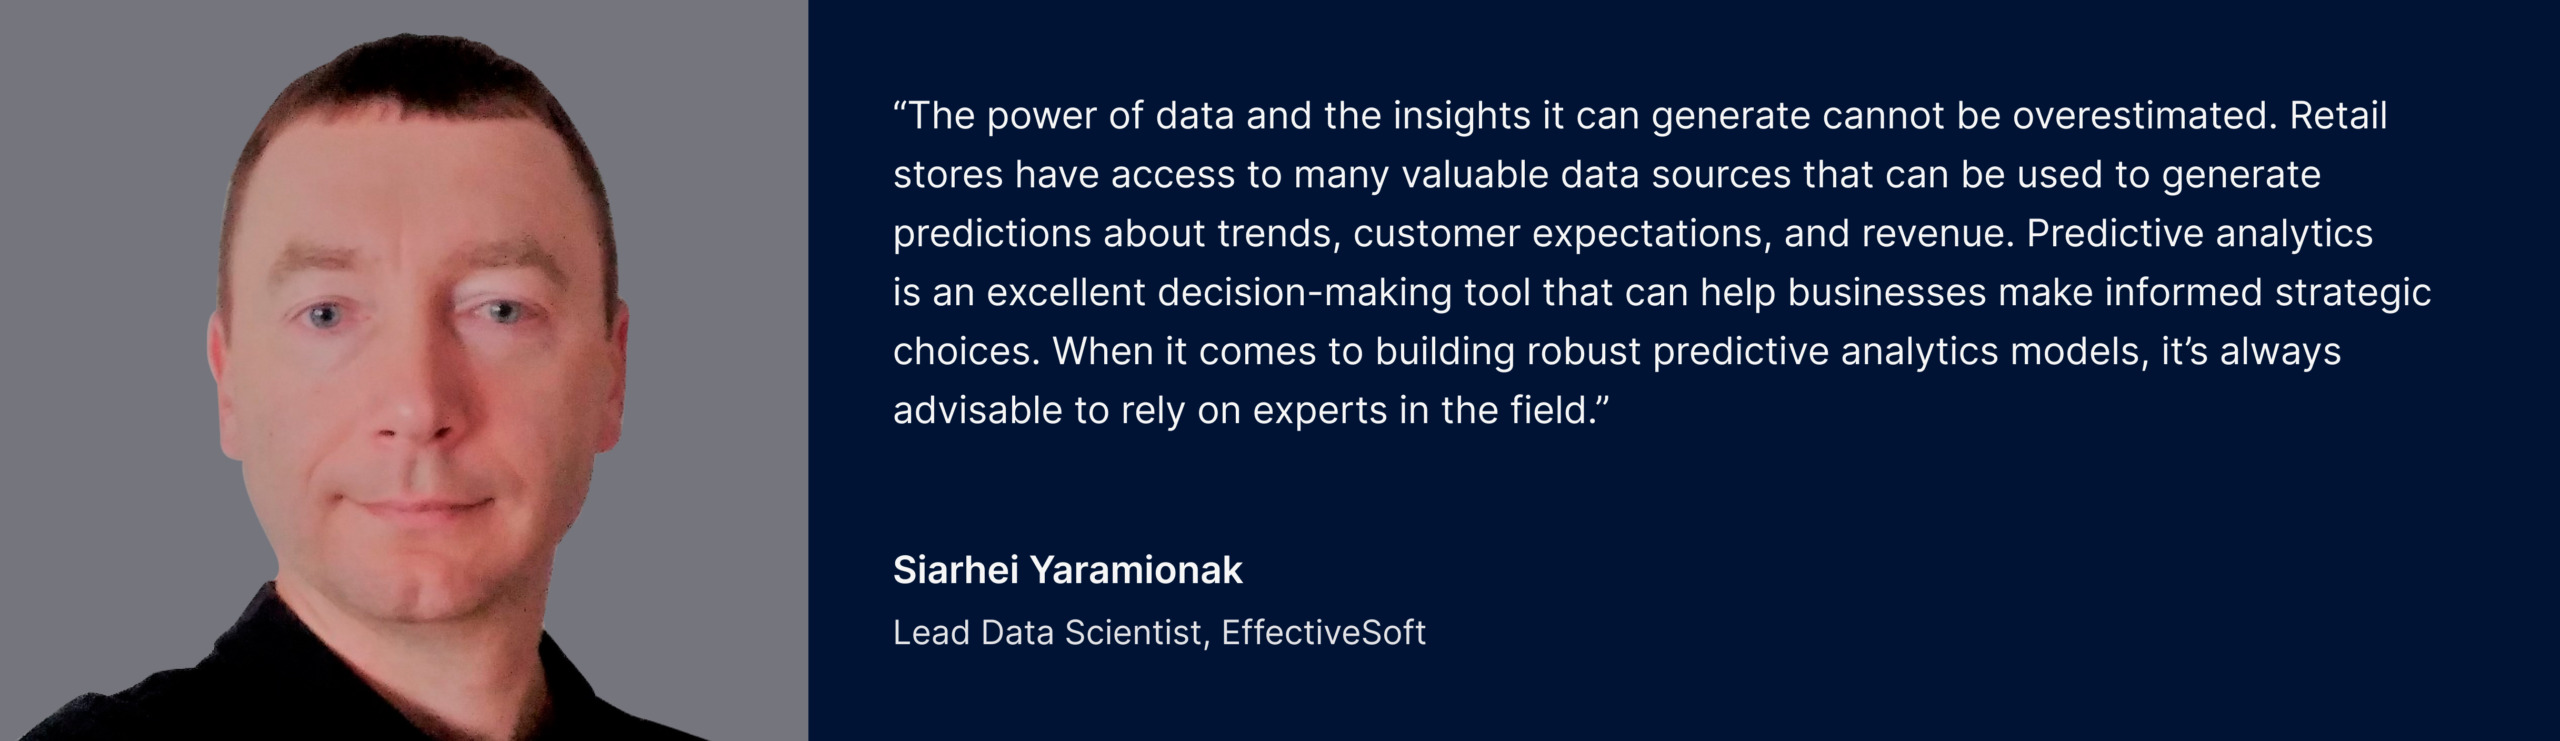 commentary from EffectiveSoft data expert